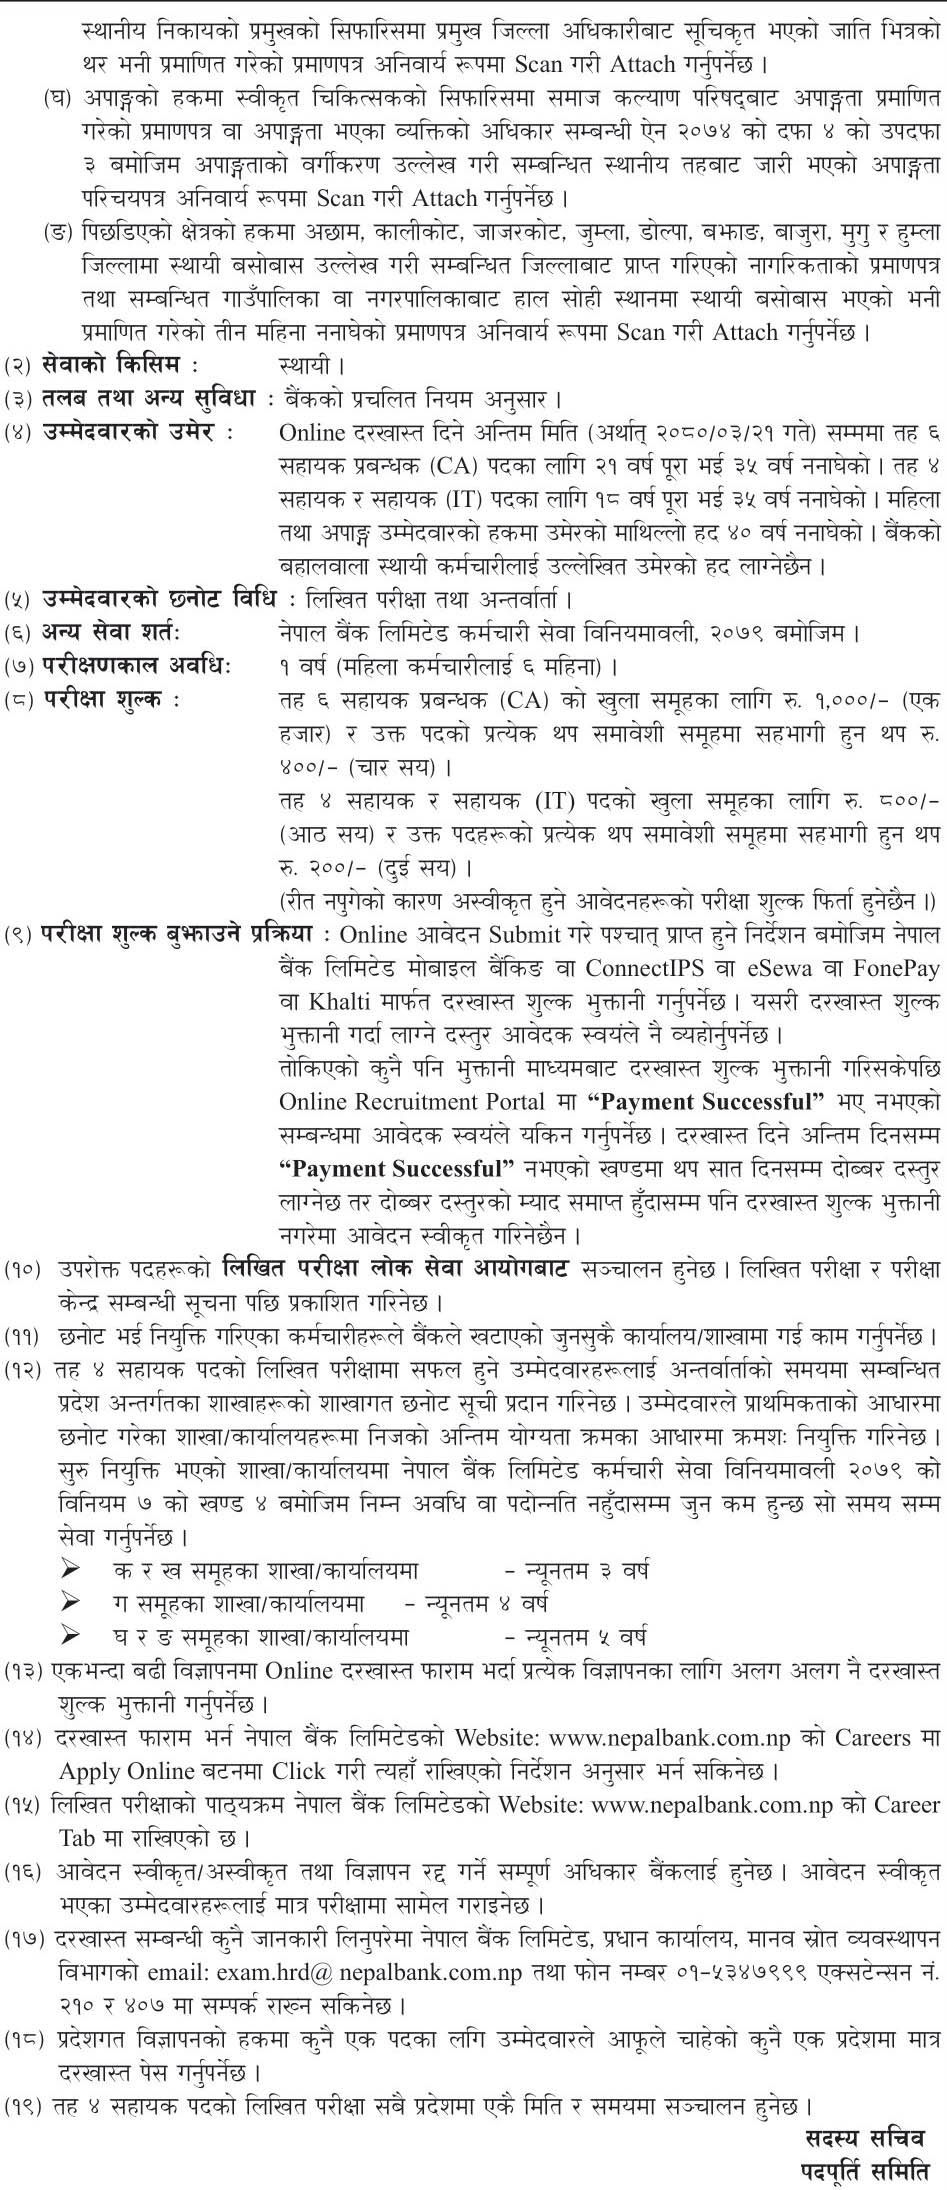 Nepal Bank Limited(NBL) has advertised for the recruitment of posts through open and inclusive competitive examination.